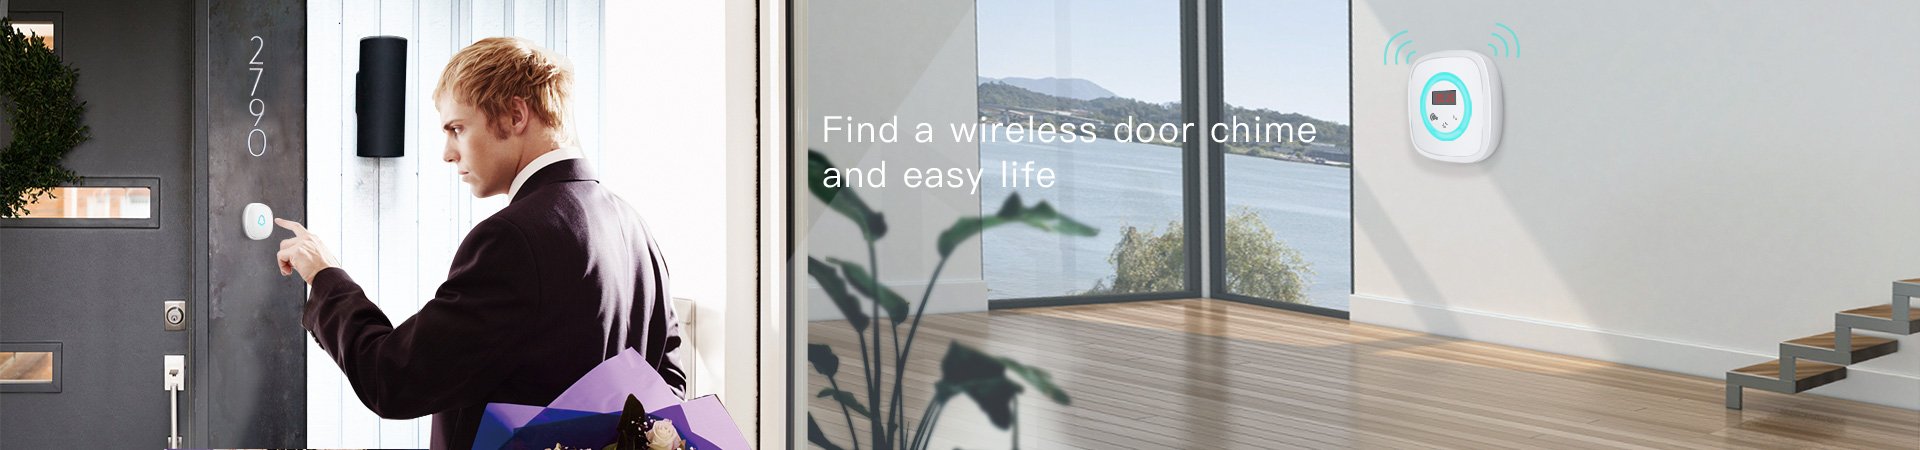 Find a wireless door chime and easy life